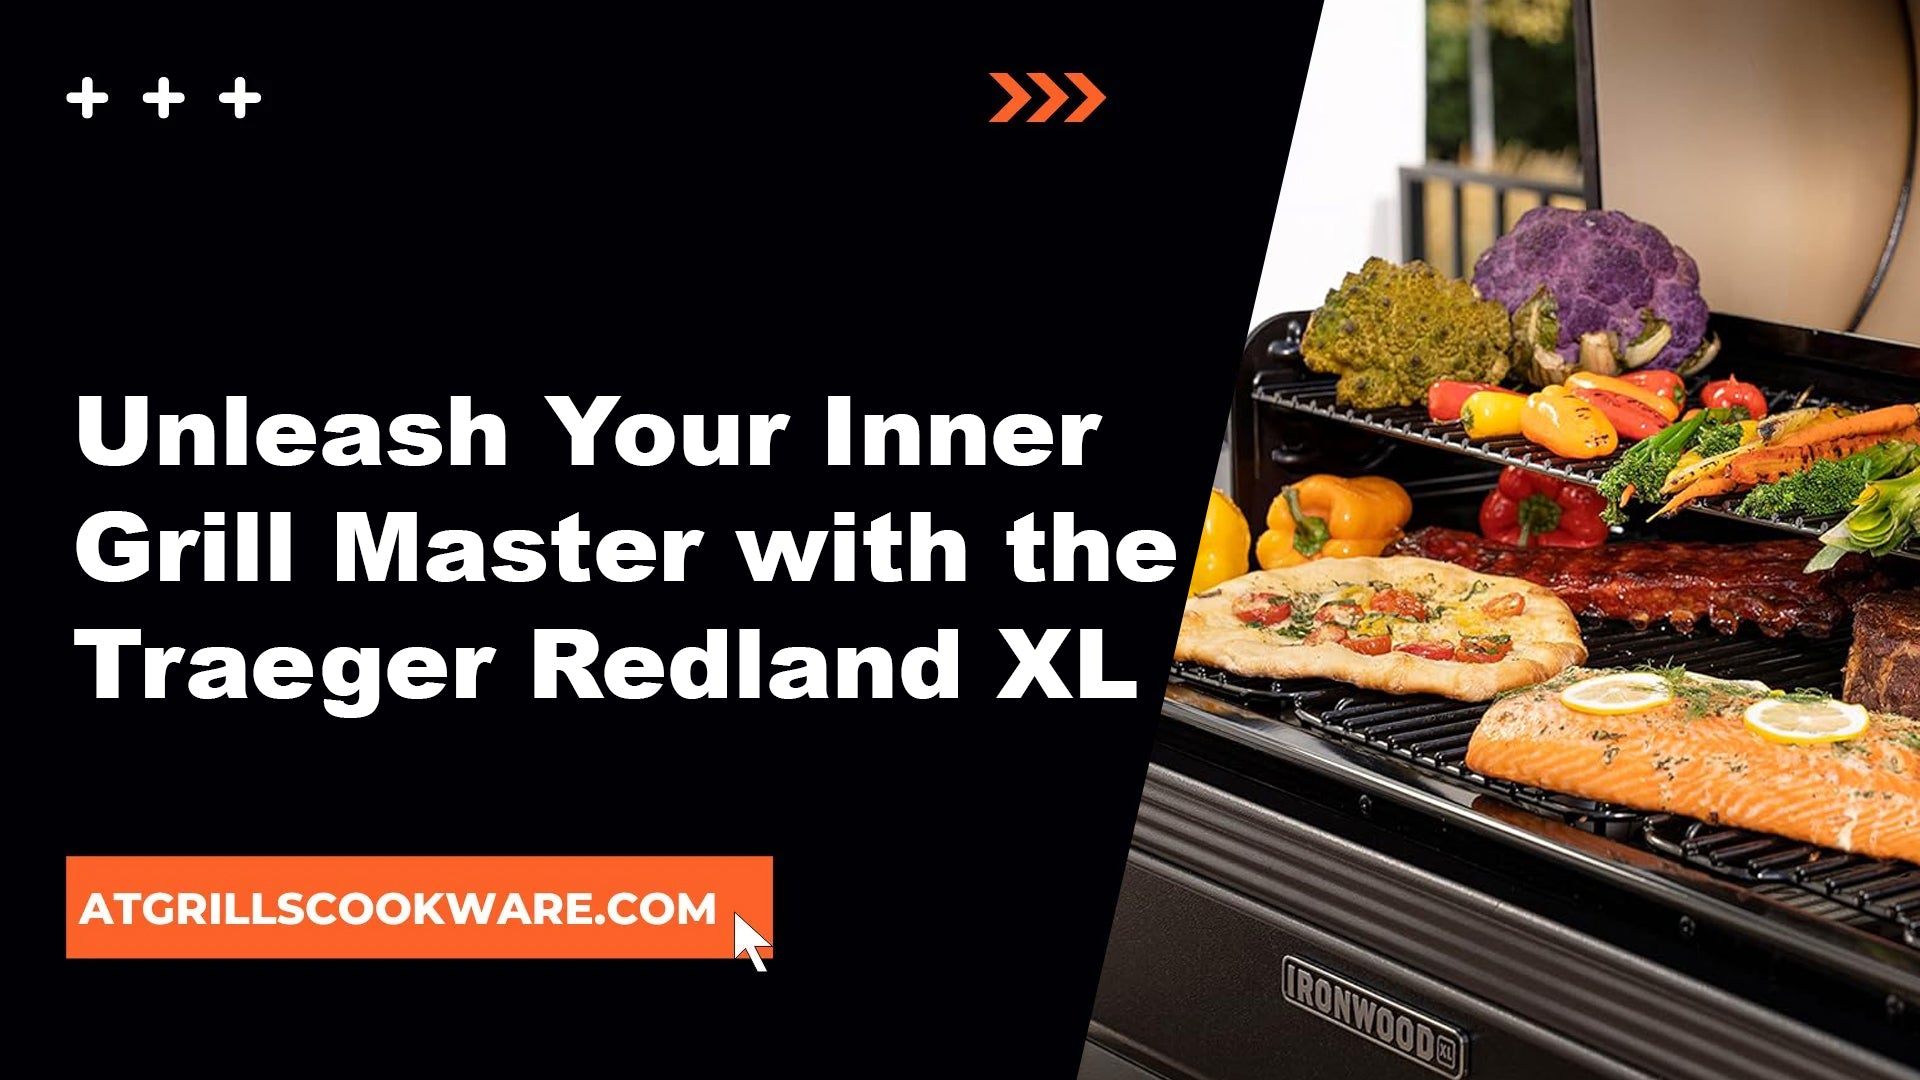 Unleash Your Inner Grill Master with the Traeger Redland XL